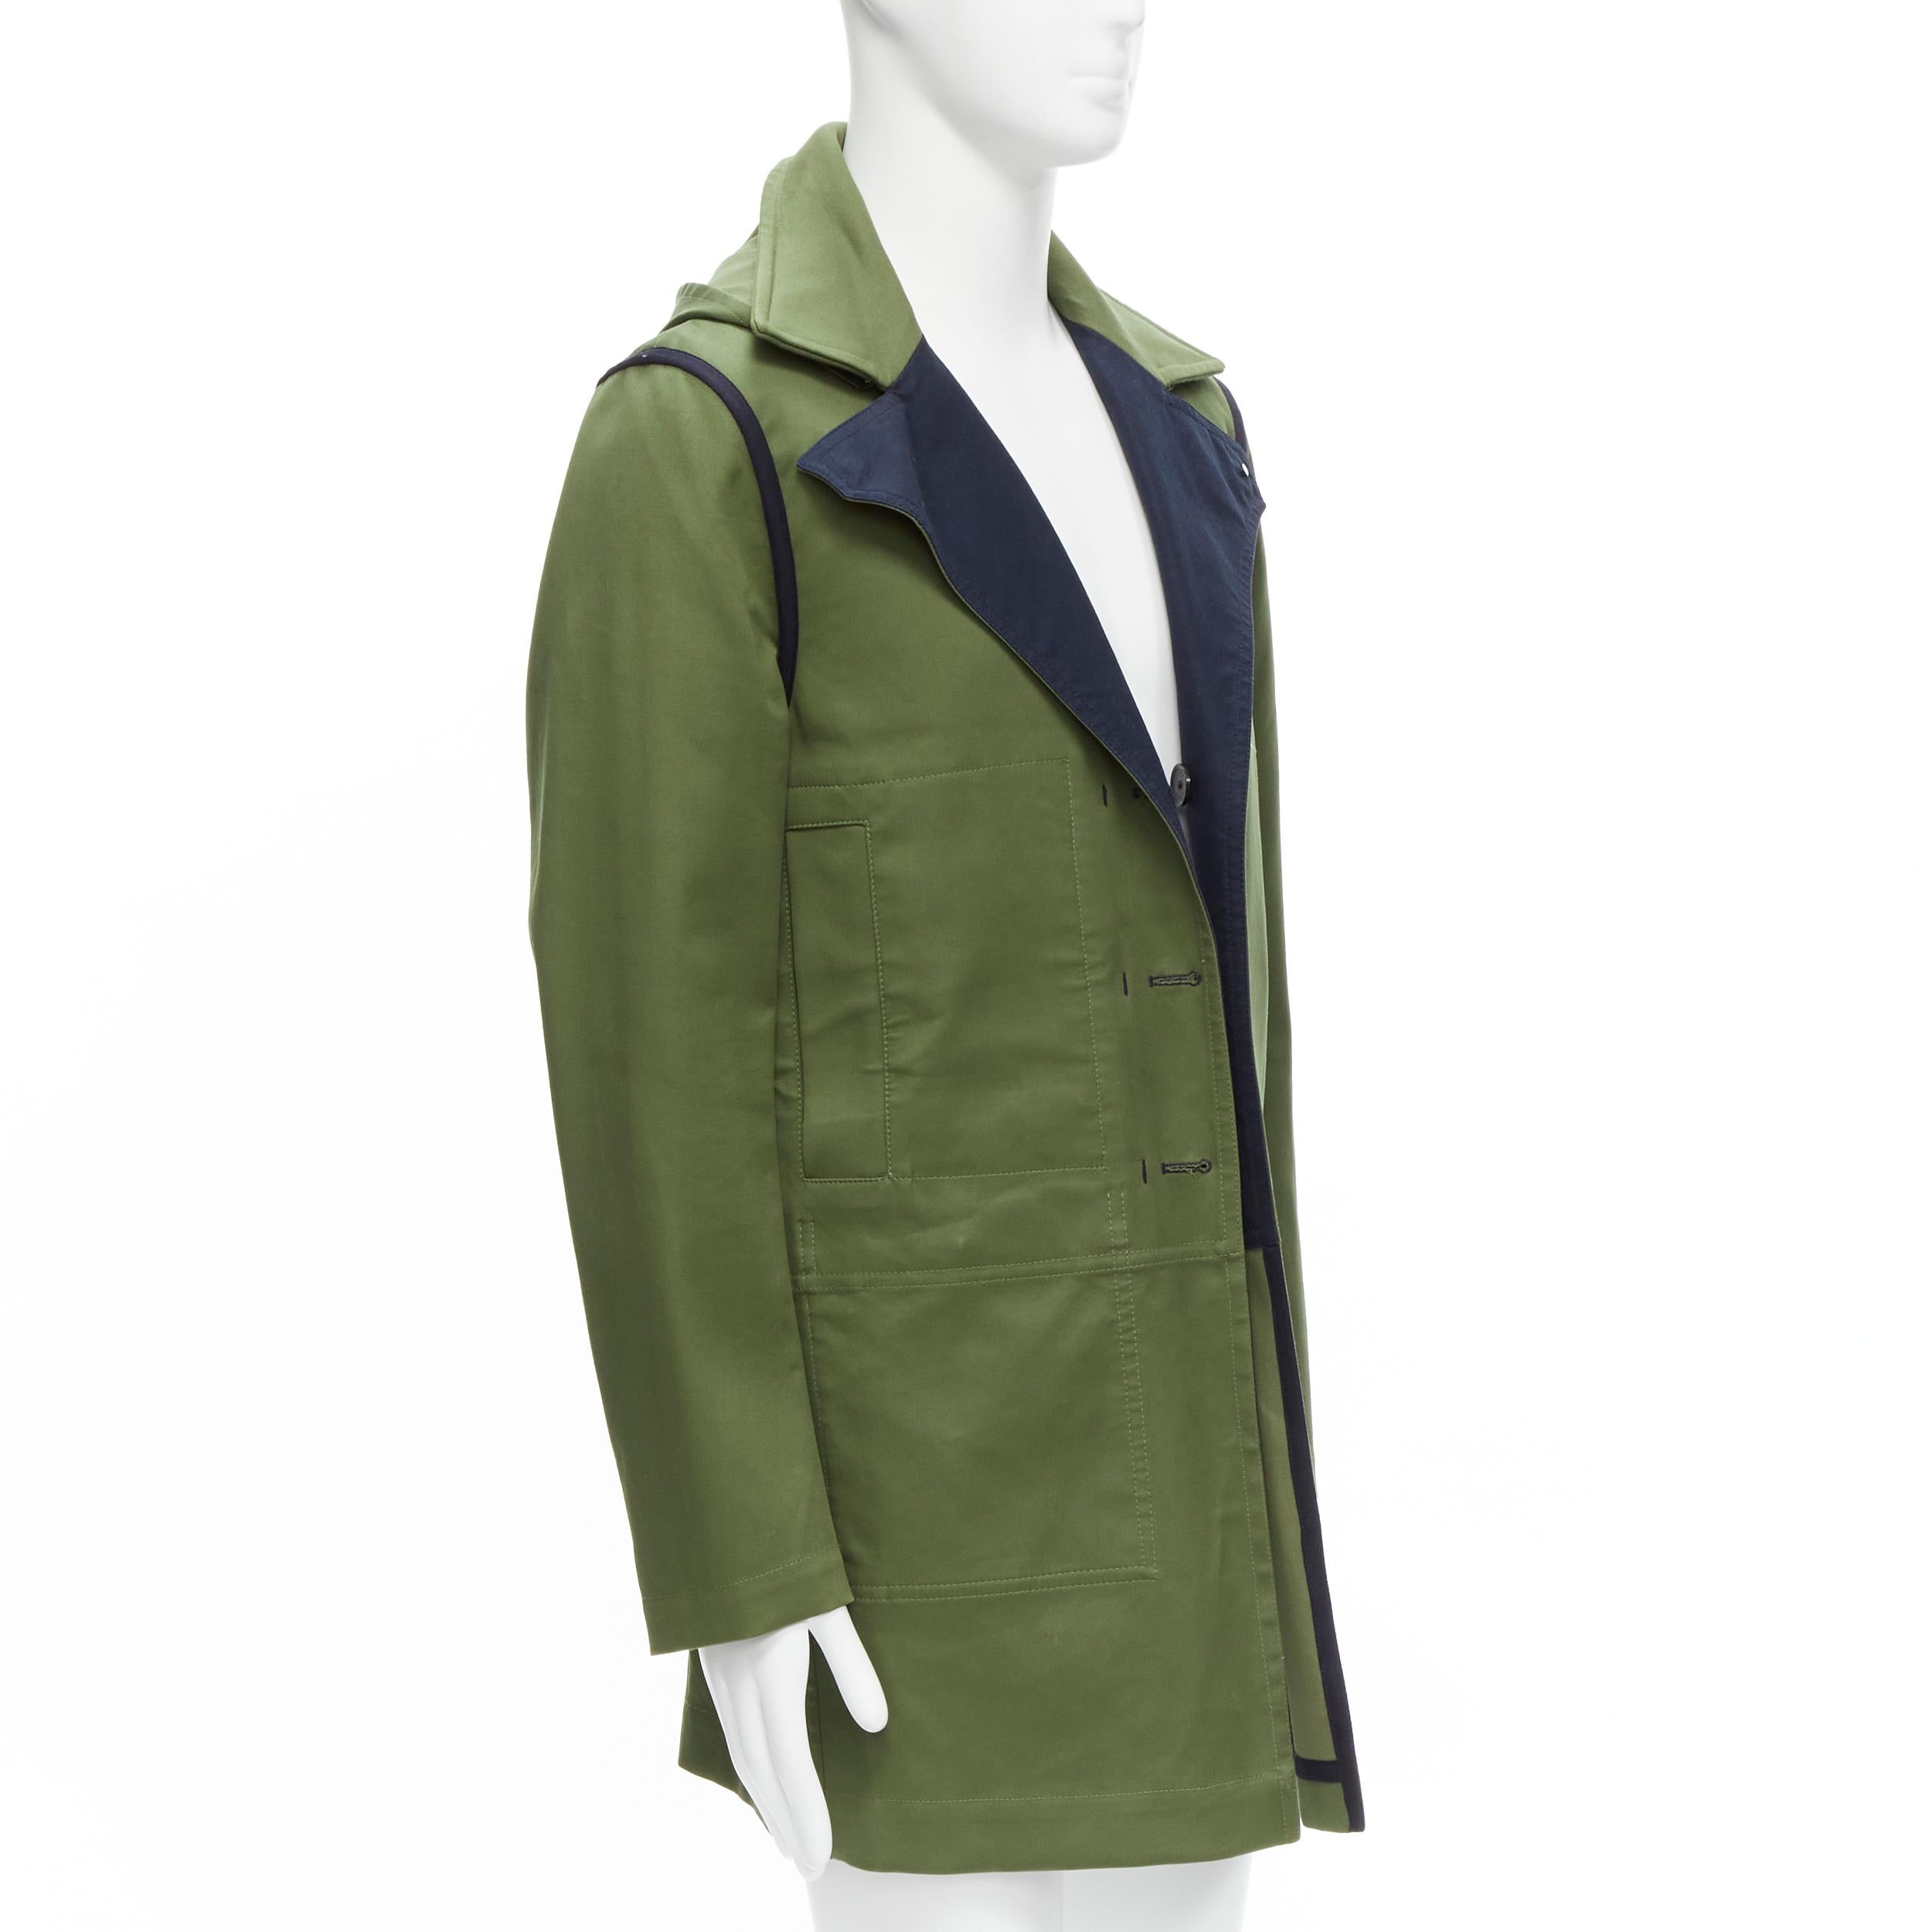 VALENTINO Reversible green navy cotton poplin oversized collar mid coat EU48 M
Reference: YNWG/A00088
Brand: Valentino
Designer: Pier Paolo Piccioli
Material: Cotton, Blend
Color: Green, Navy
Pattern: Solid
Closure: Button
Lining: Fabric
Extra